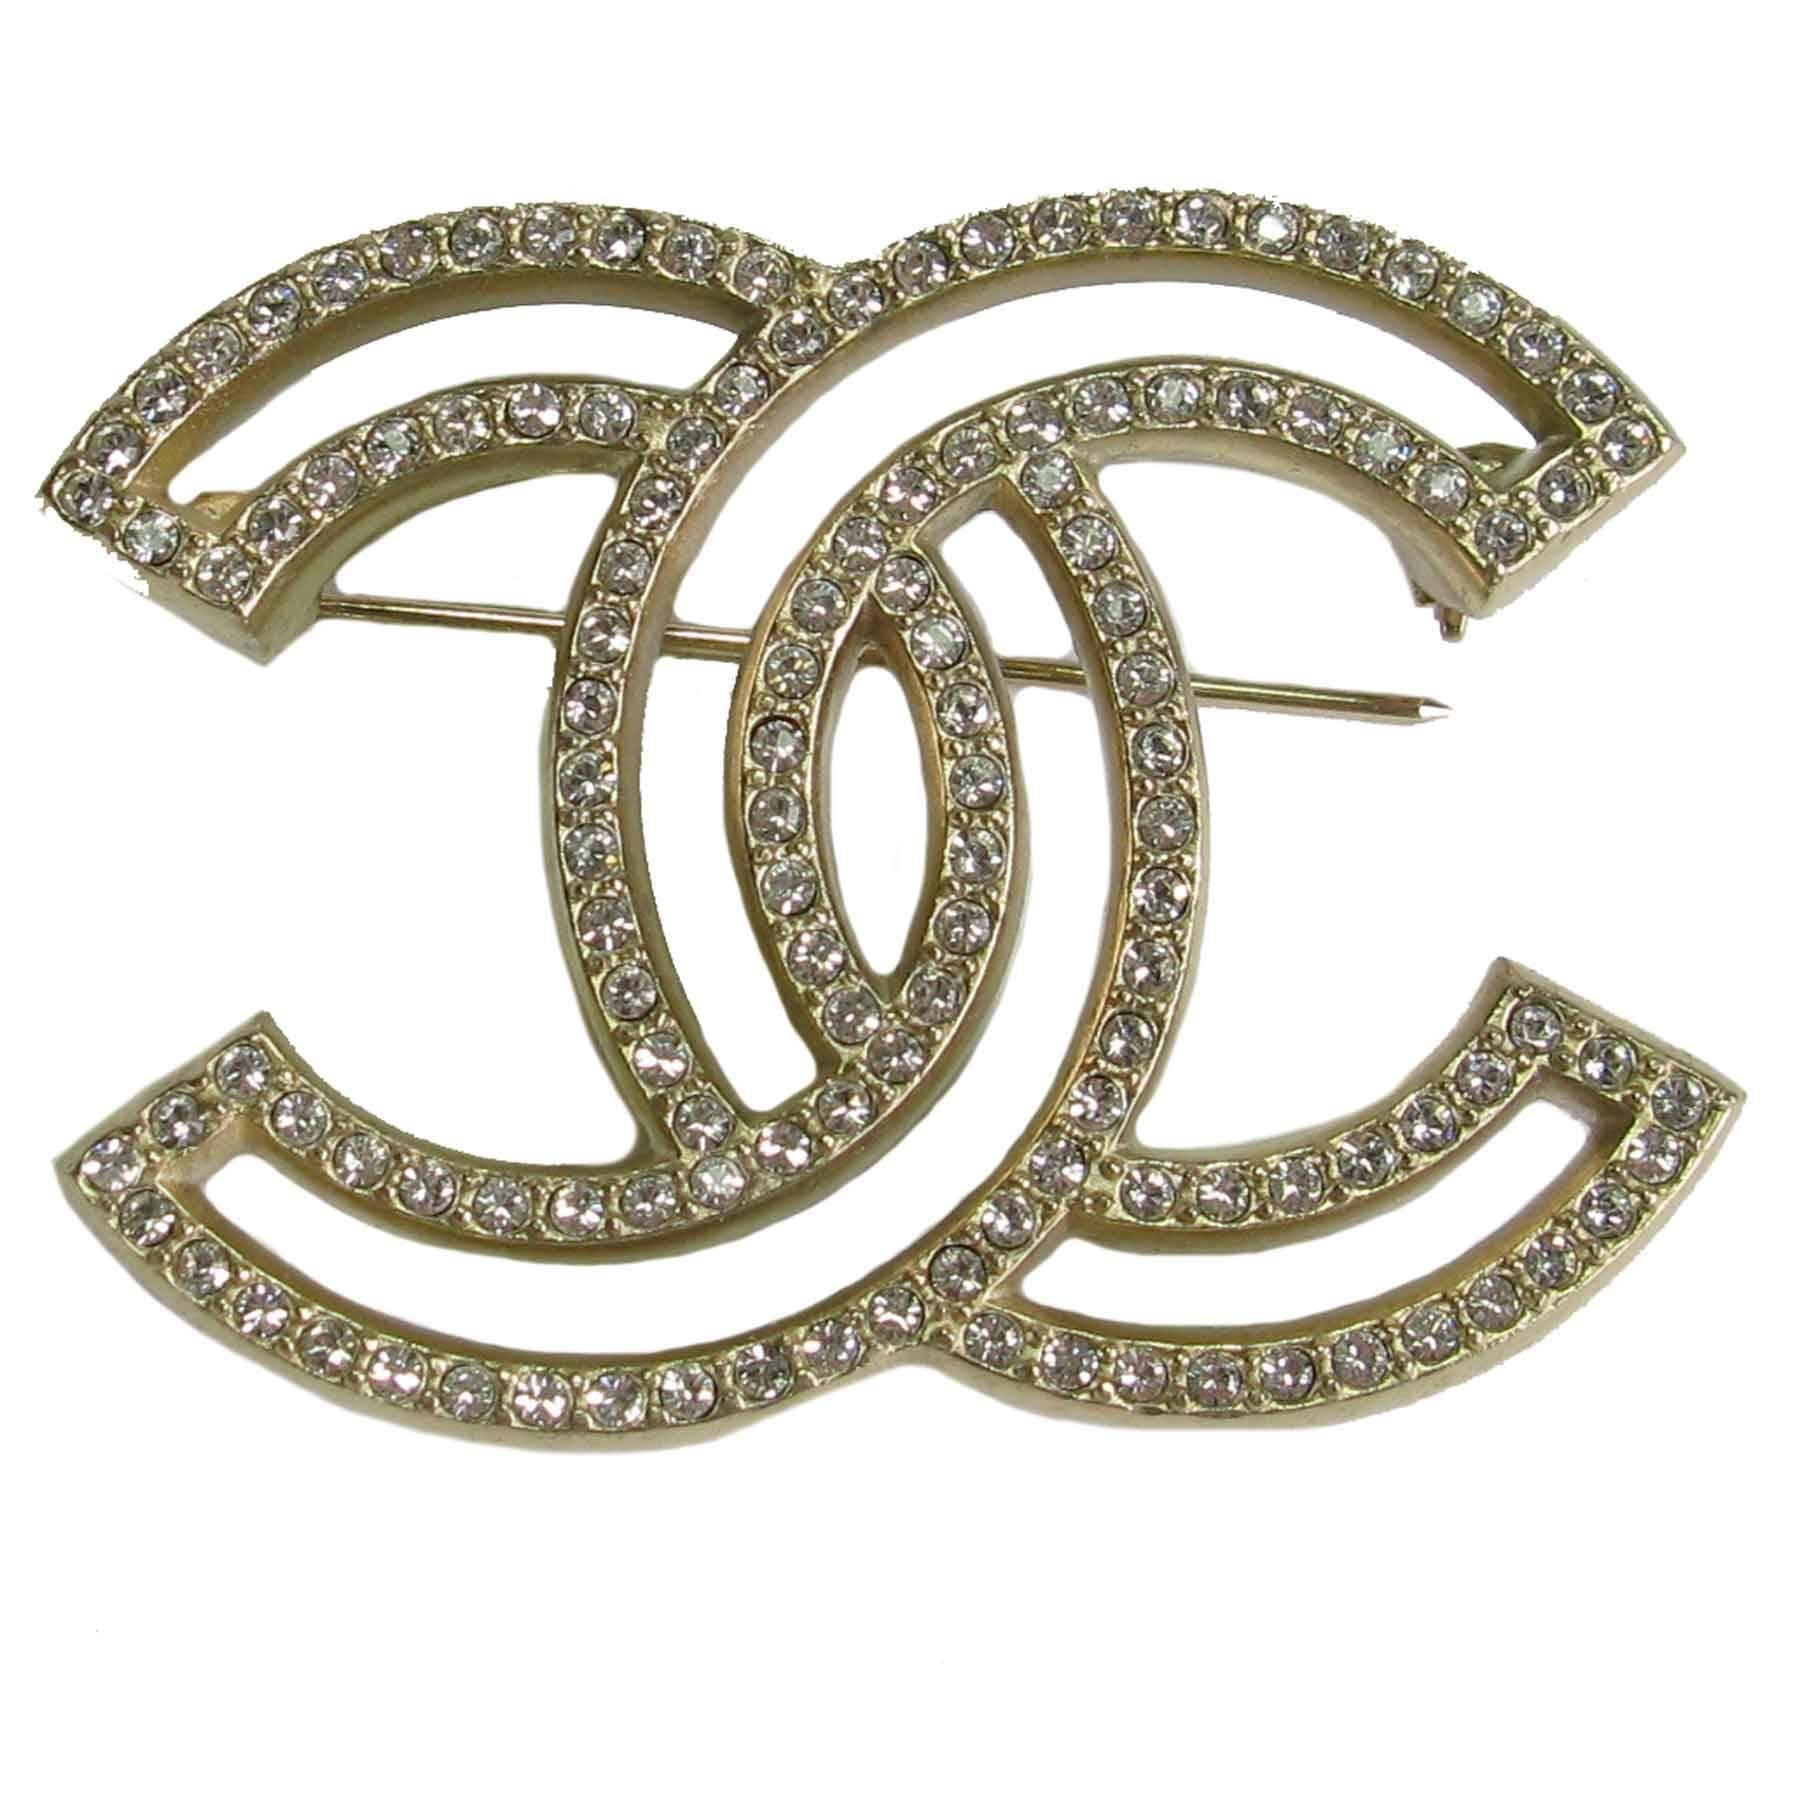 CHANEL Brooch Double C set with Rhinestones in Gilded Metal